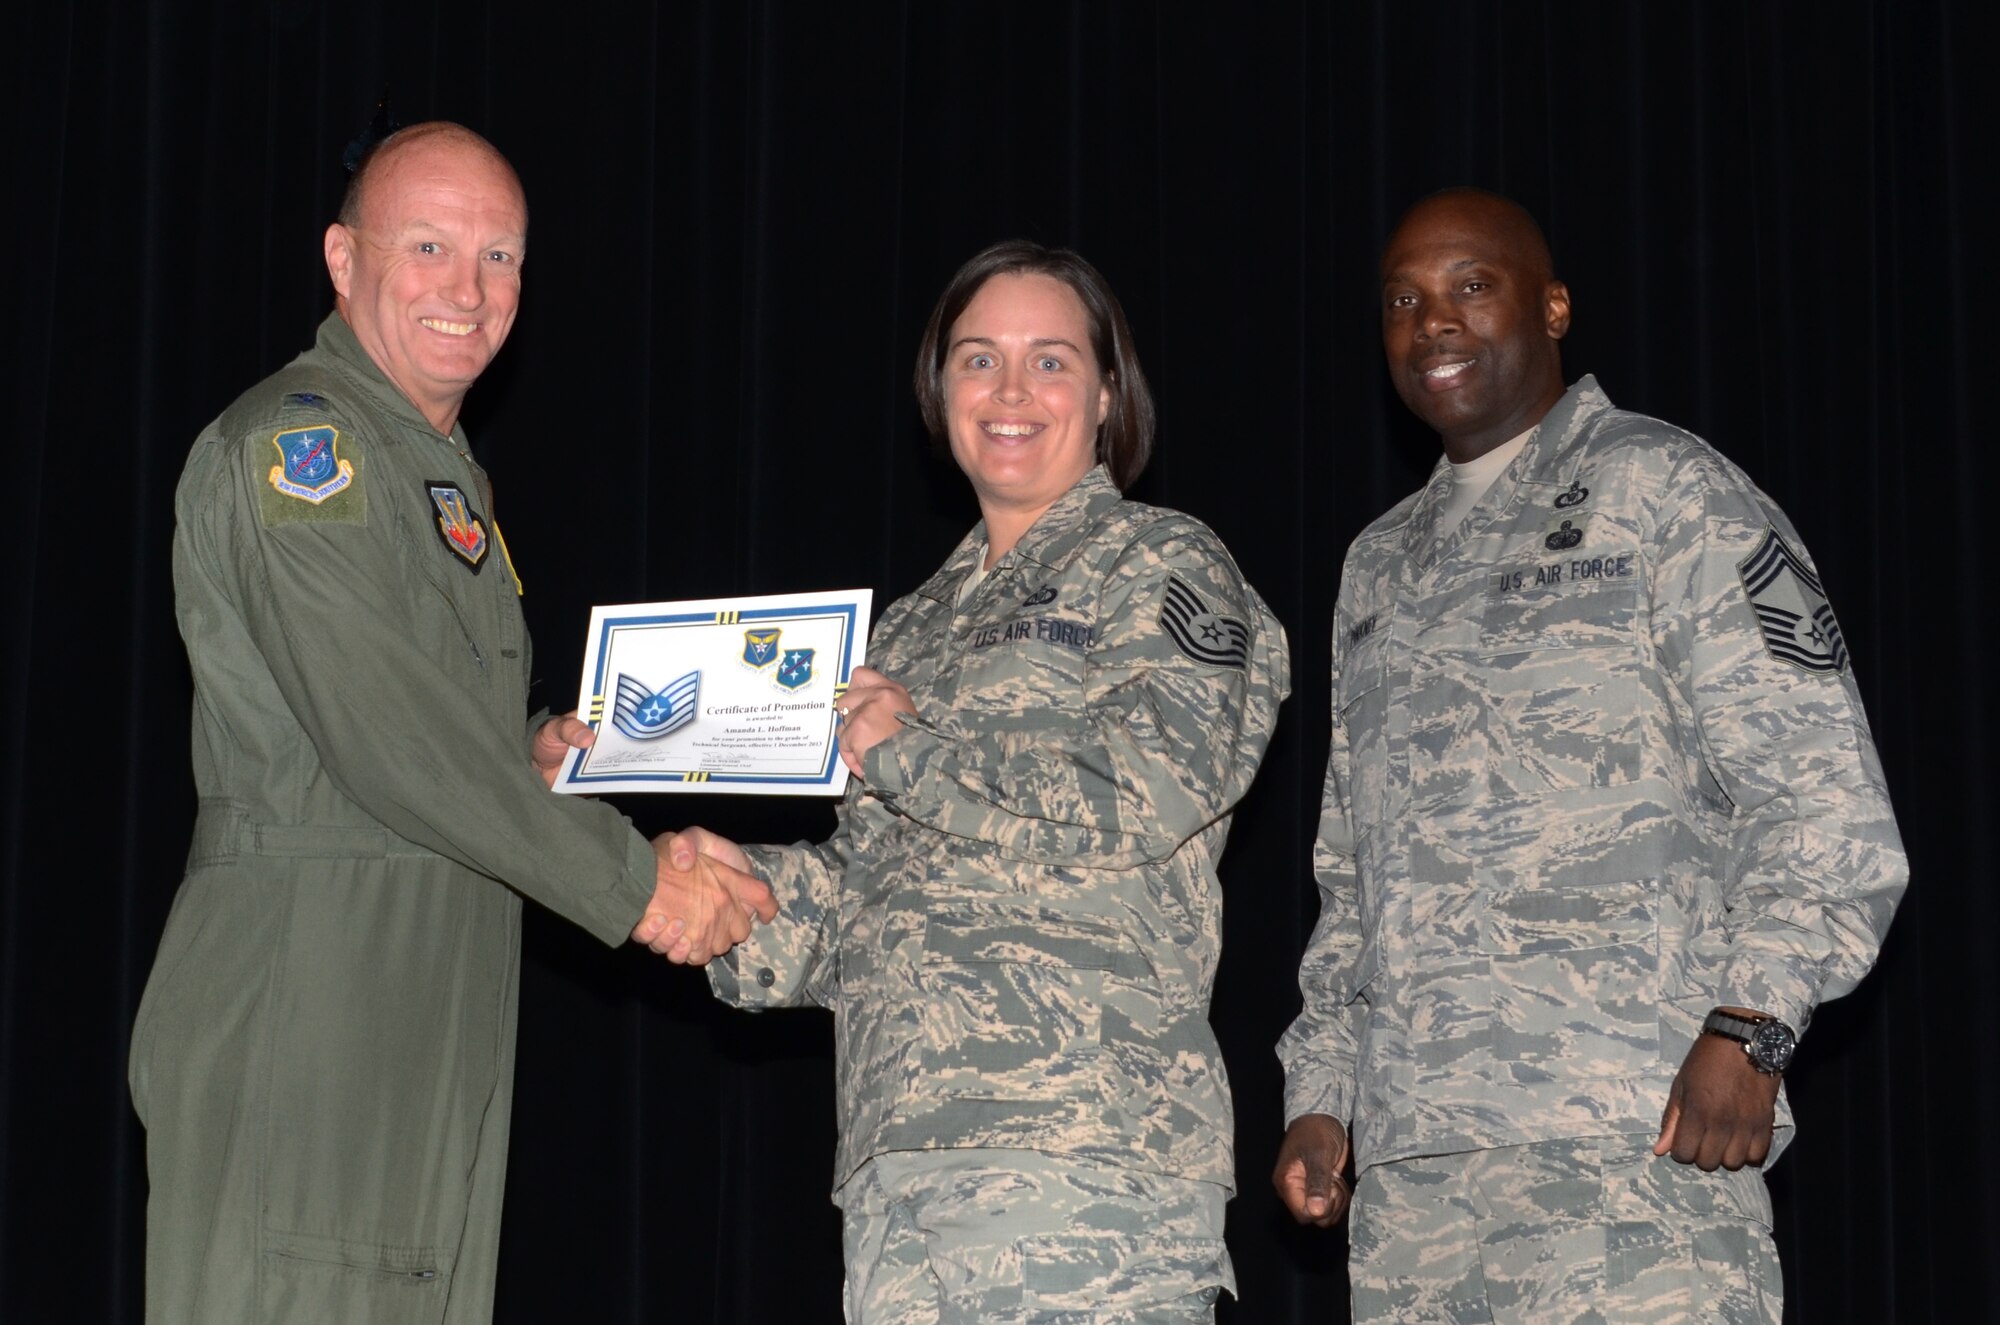 Staff Sgt. Amanda Hoffman, 612th Air and Space Operations Center, receives a certificate from Col. Bruce Smith, 12th Air Force (Air Forces Southern) vice commander, congratulating her on her promotion to technical sergeant at the base theater on Davis-Monthan AFB, Ariz., Nov. 27, 2013.  Hoffman’s promotion will go into effect on Dec. 1. (U.S. Air Force photo by Staff Sgt. Heather R. Redman/Released)